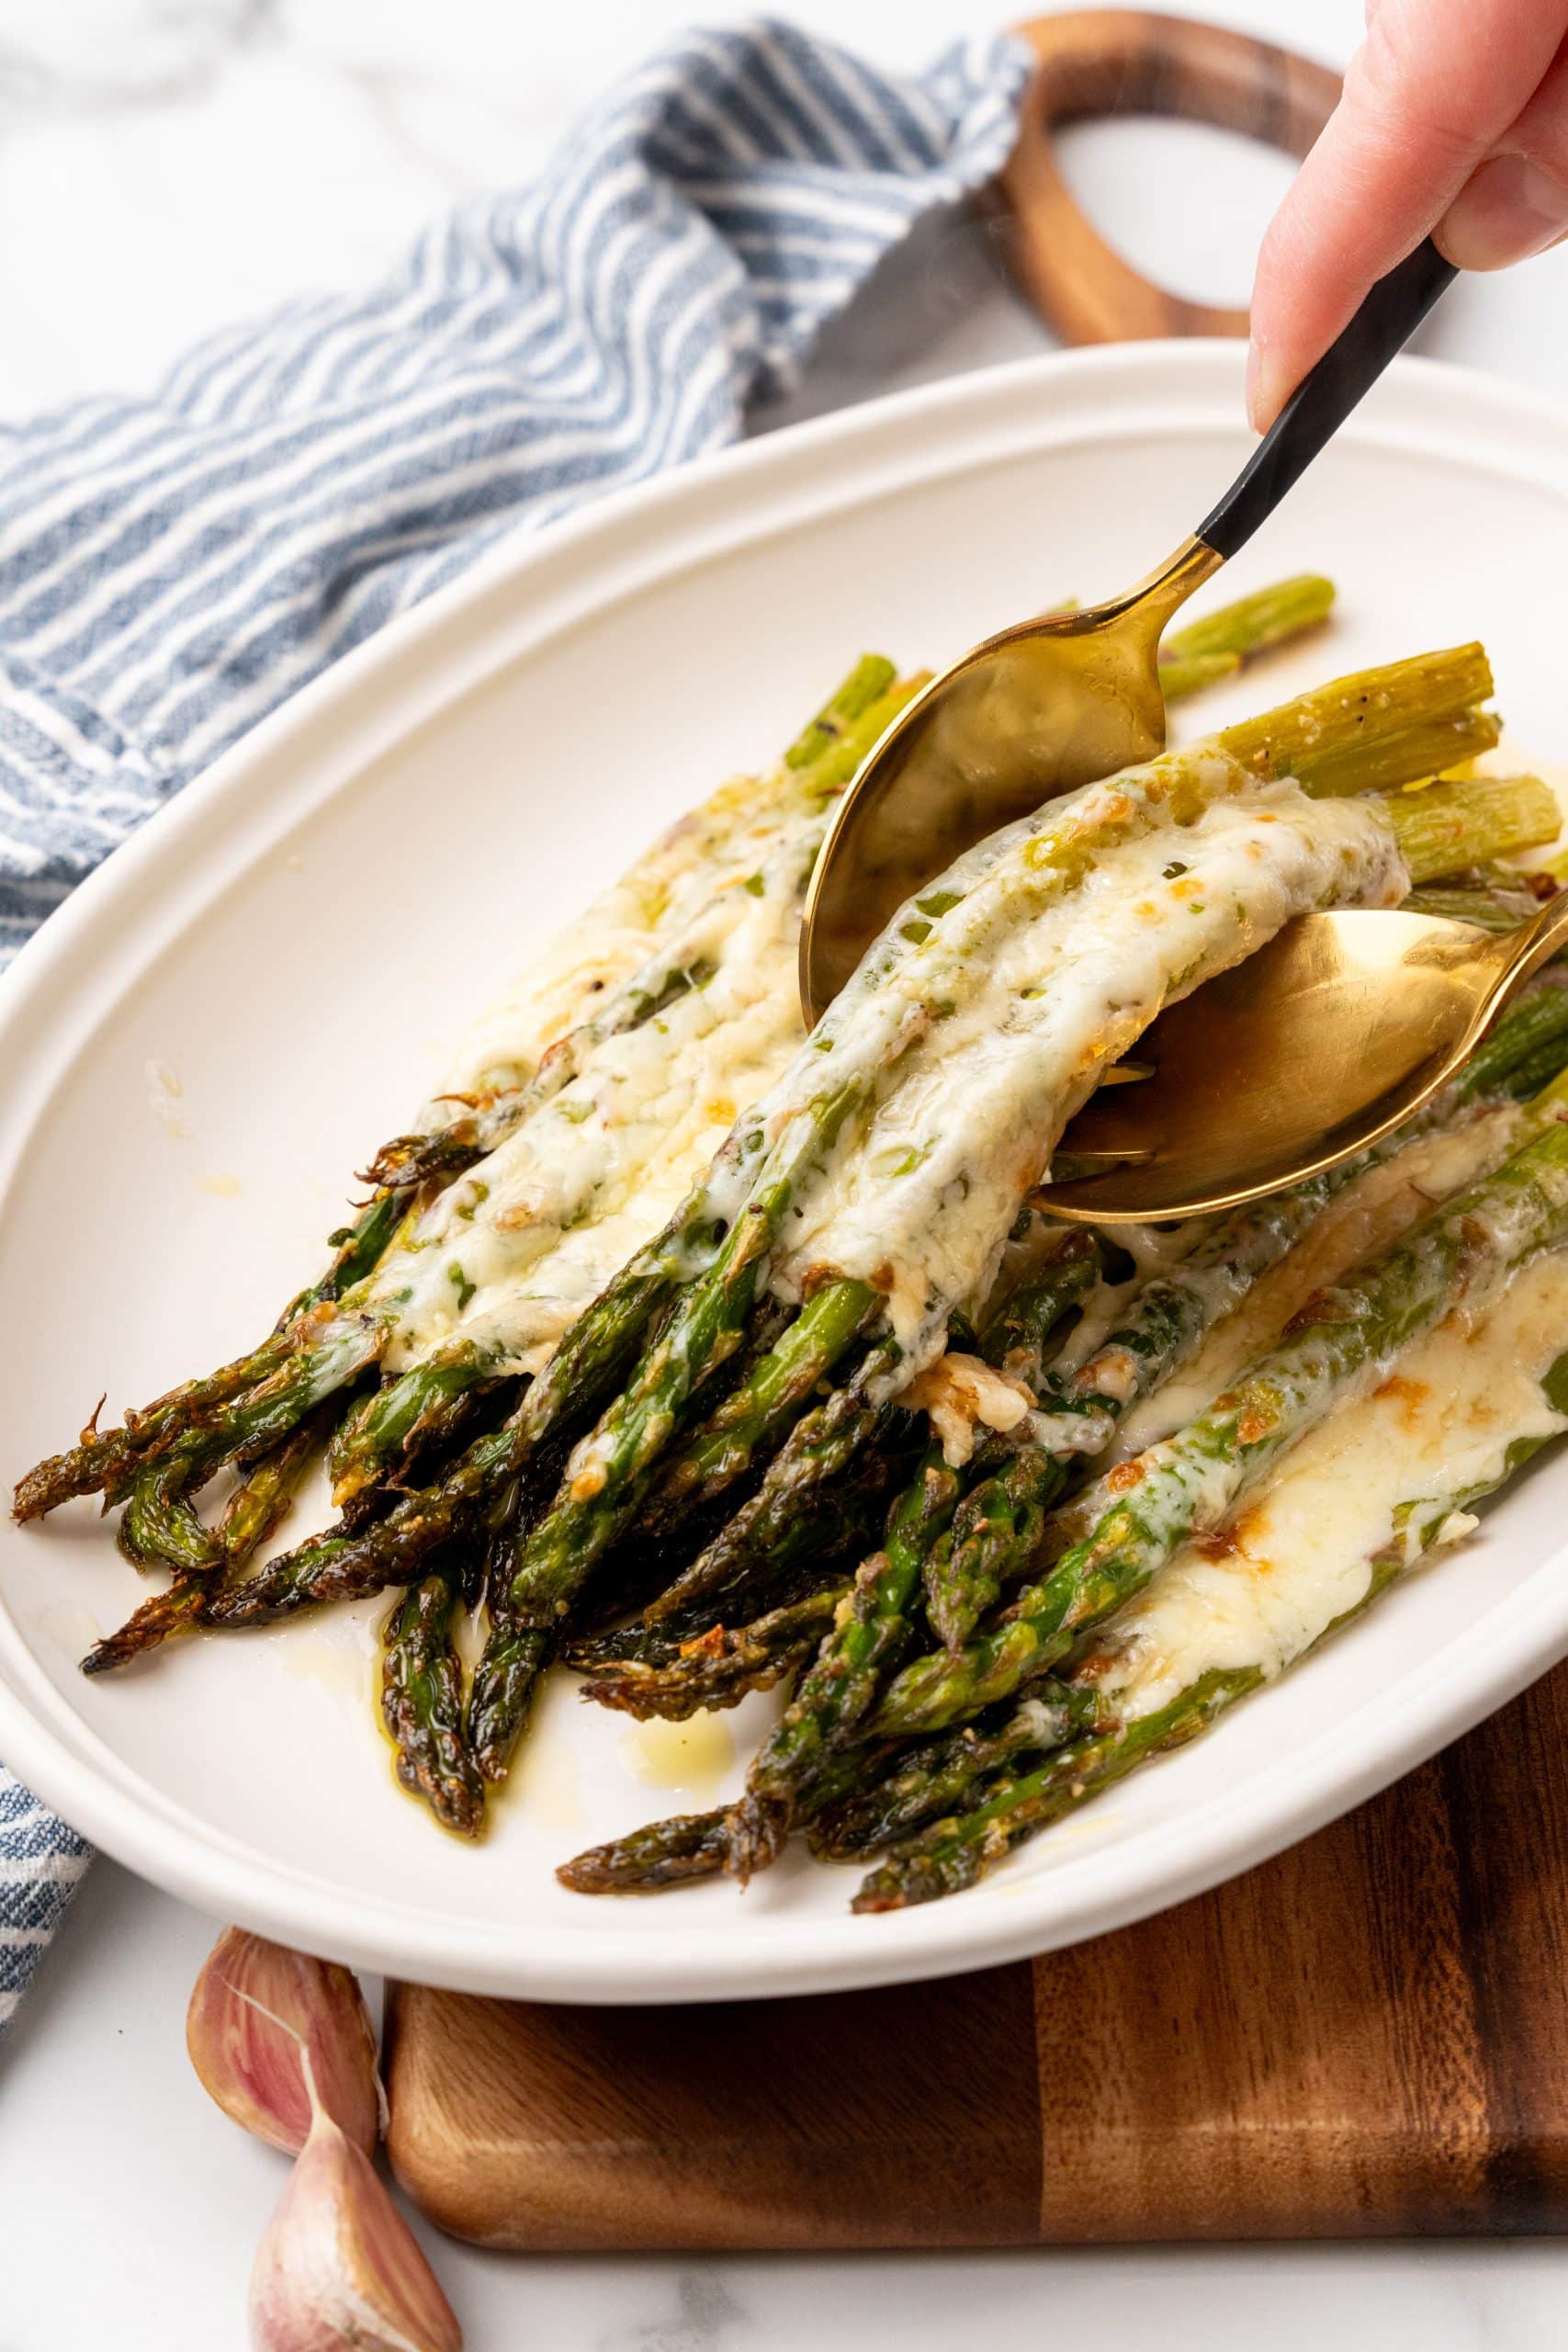 two golden salad forks lifting cheesy garlic roasted asparagus off a white serving platter